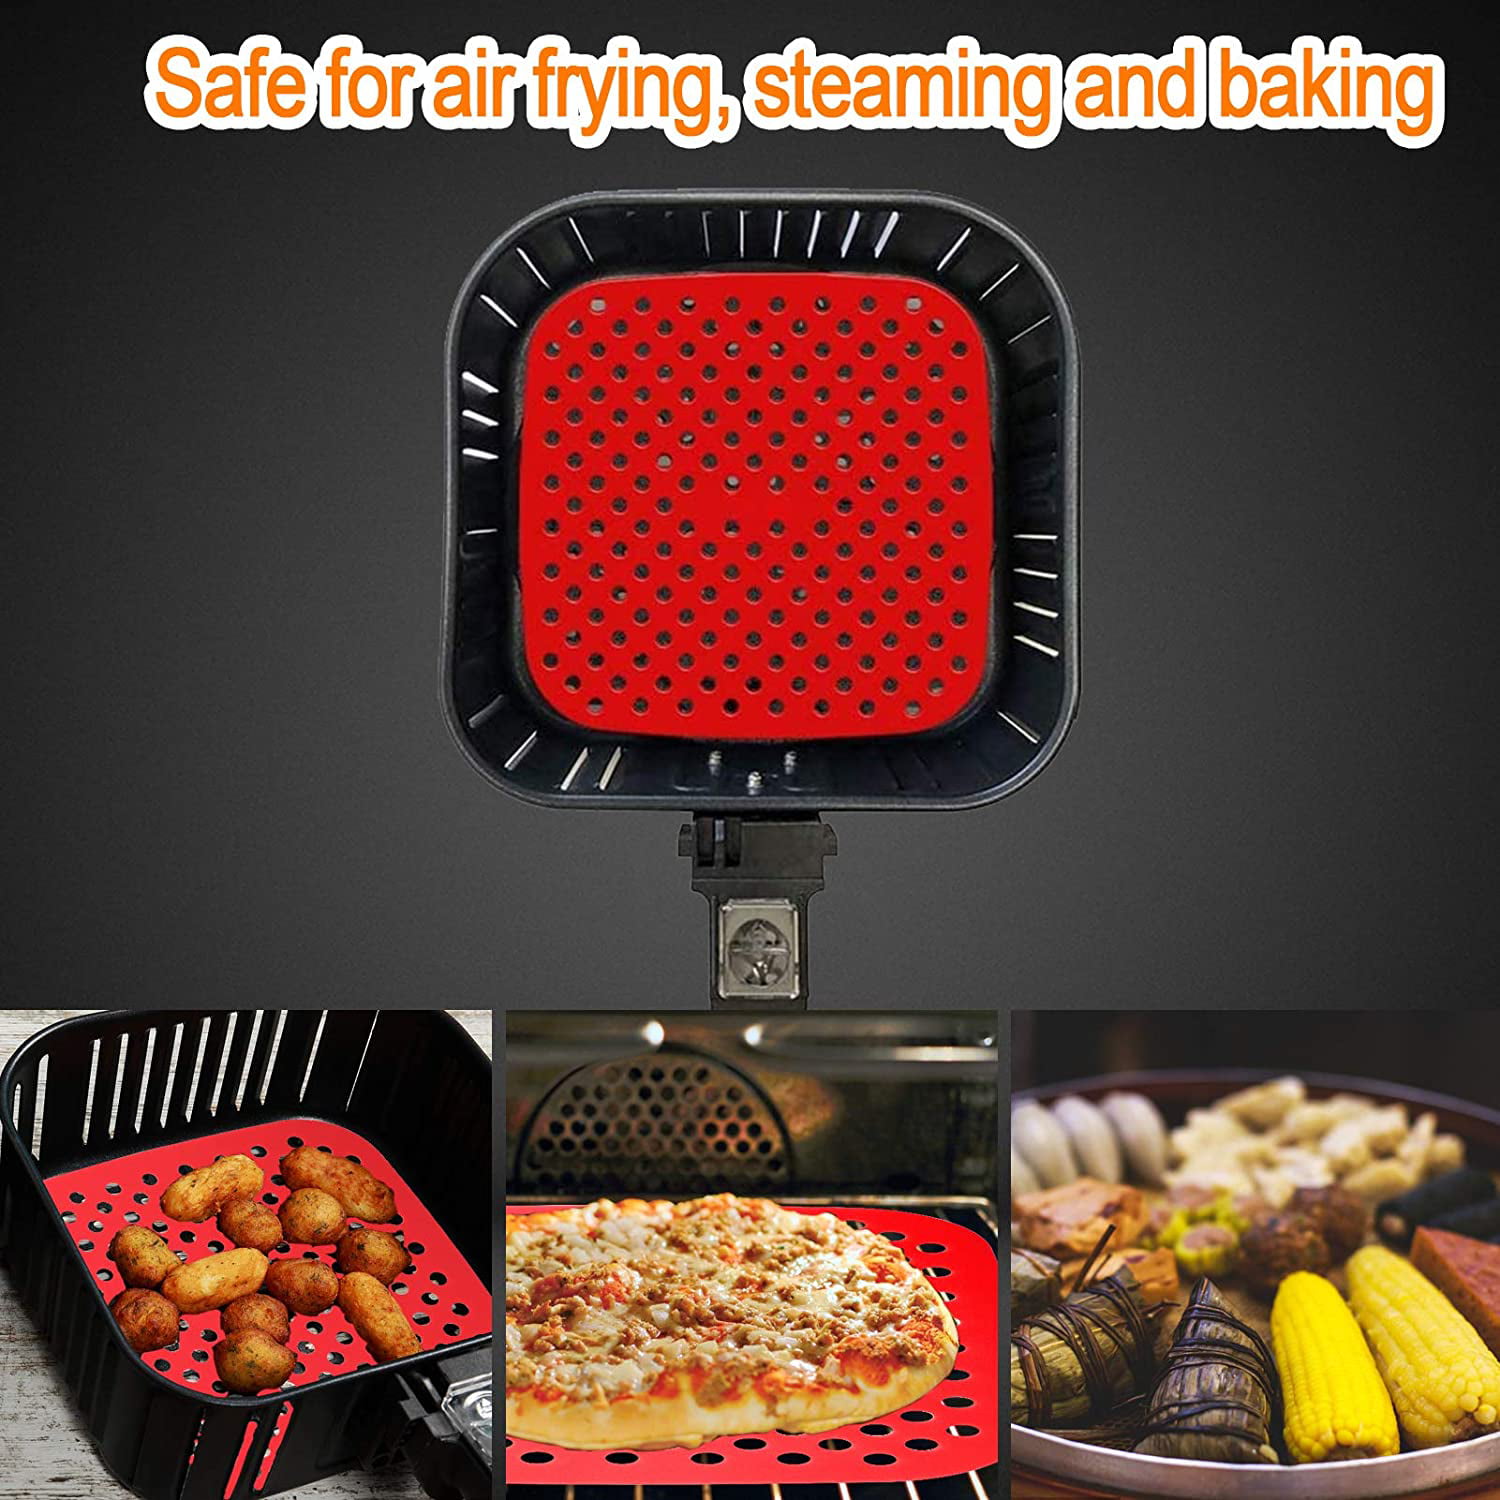 2 Pieces Reusable 8.5 Inch Air Fryer Liners, Sq Re Non-stick